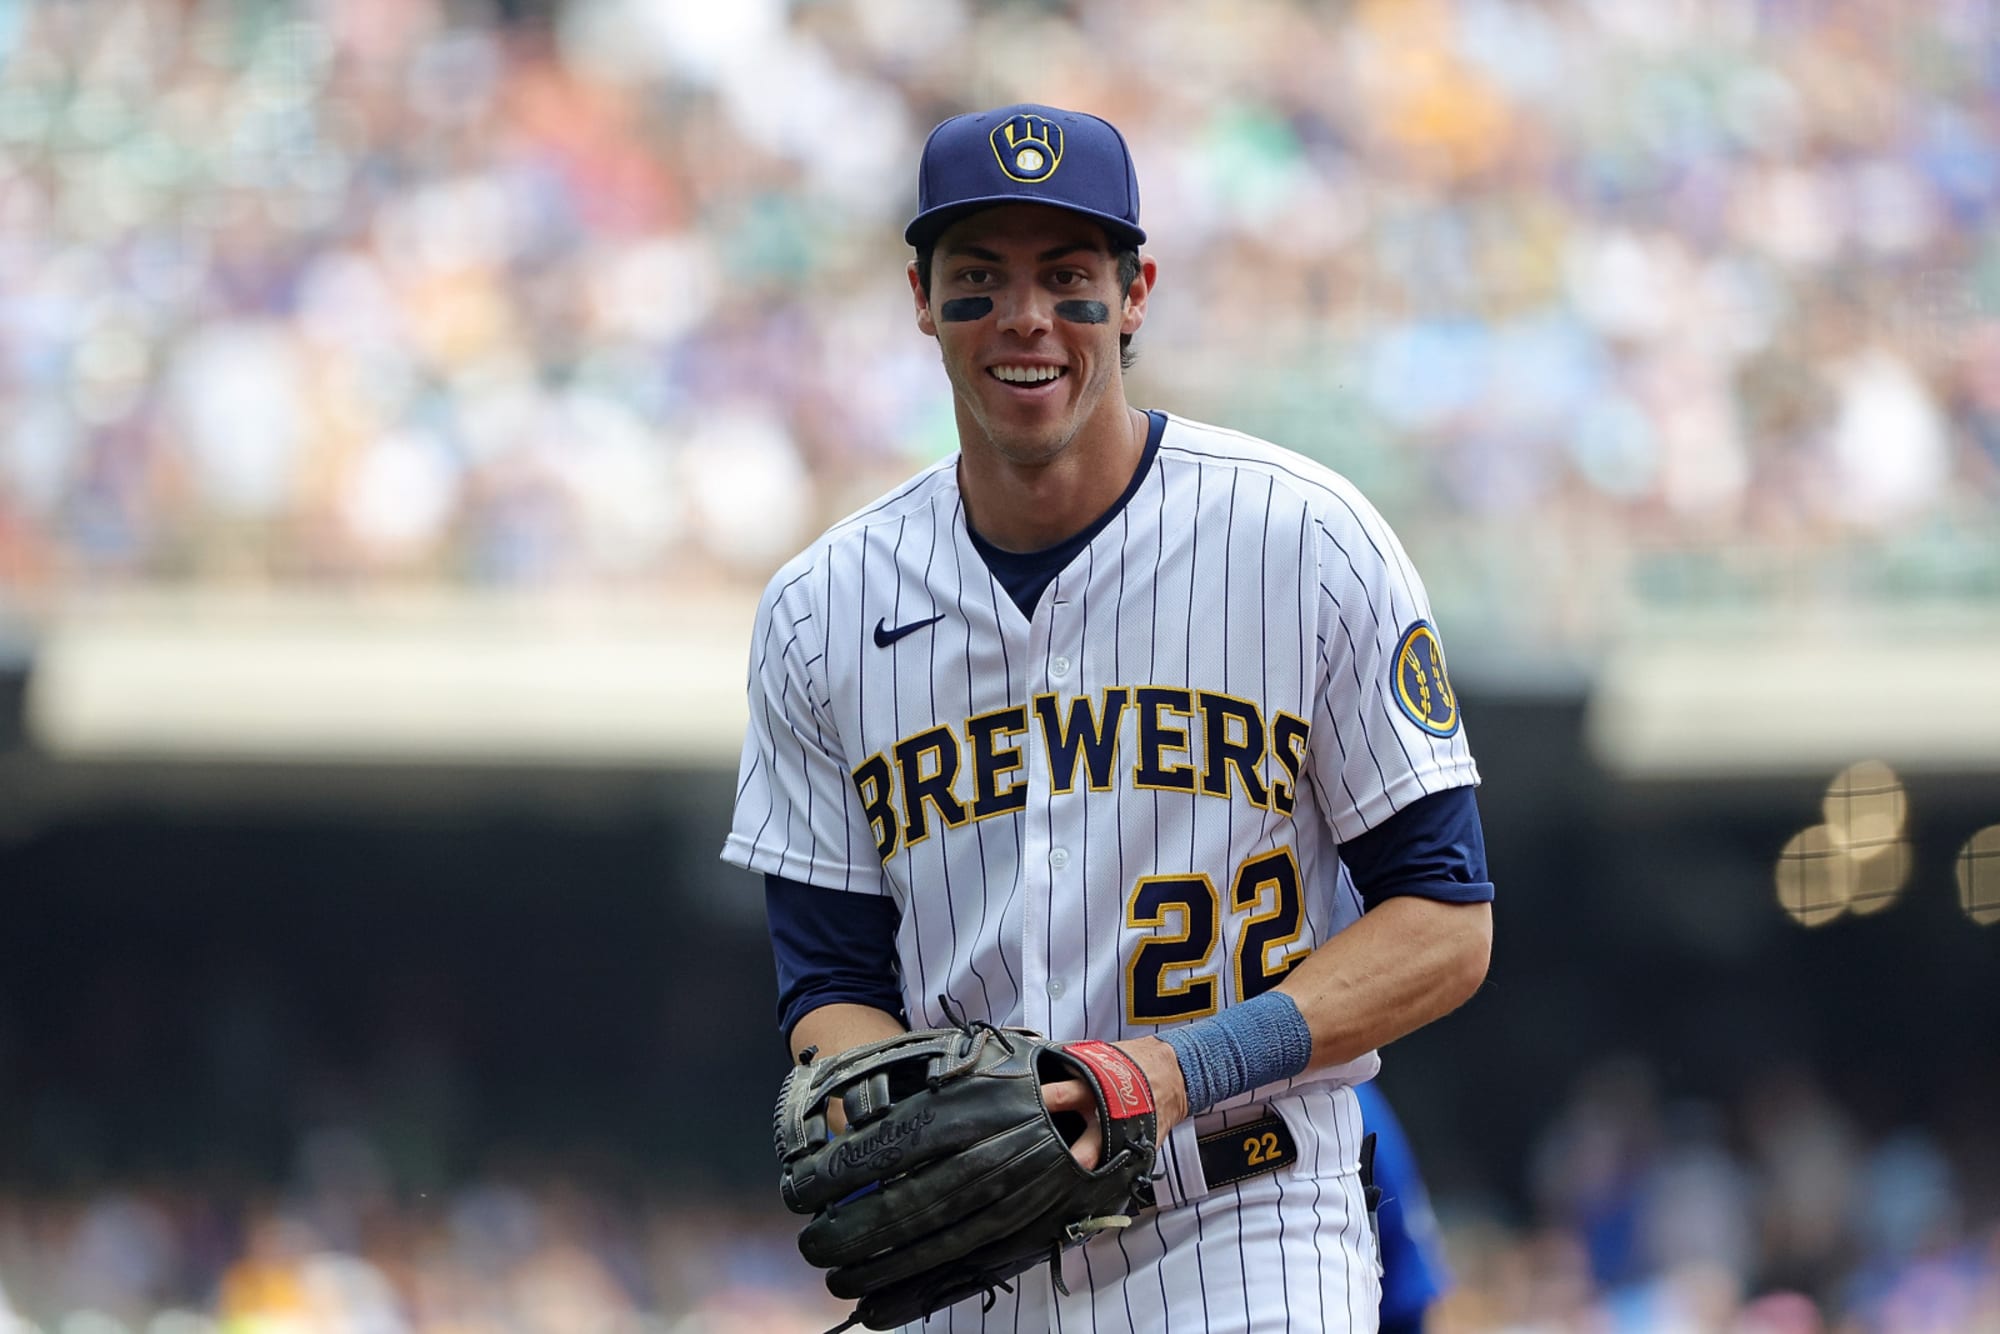 Christian Yelich, Brewers rallied to win it for Mark in the friend zone